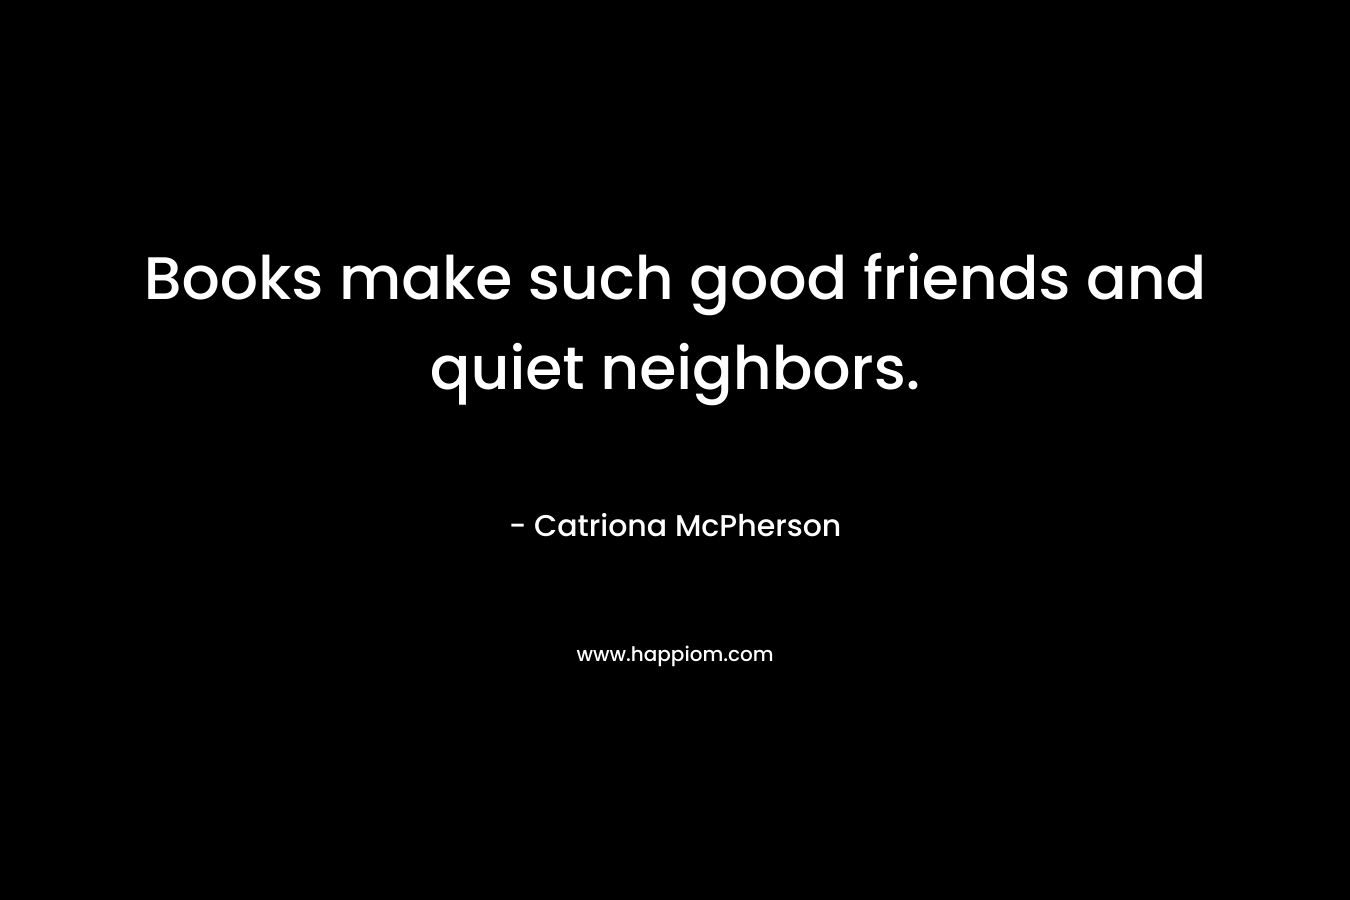 Books make such good friends and quiet neighbors.